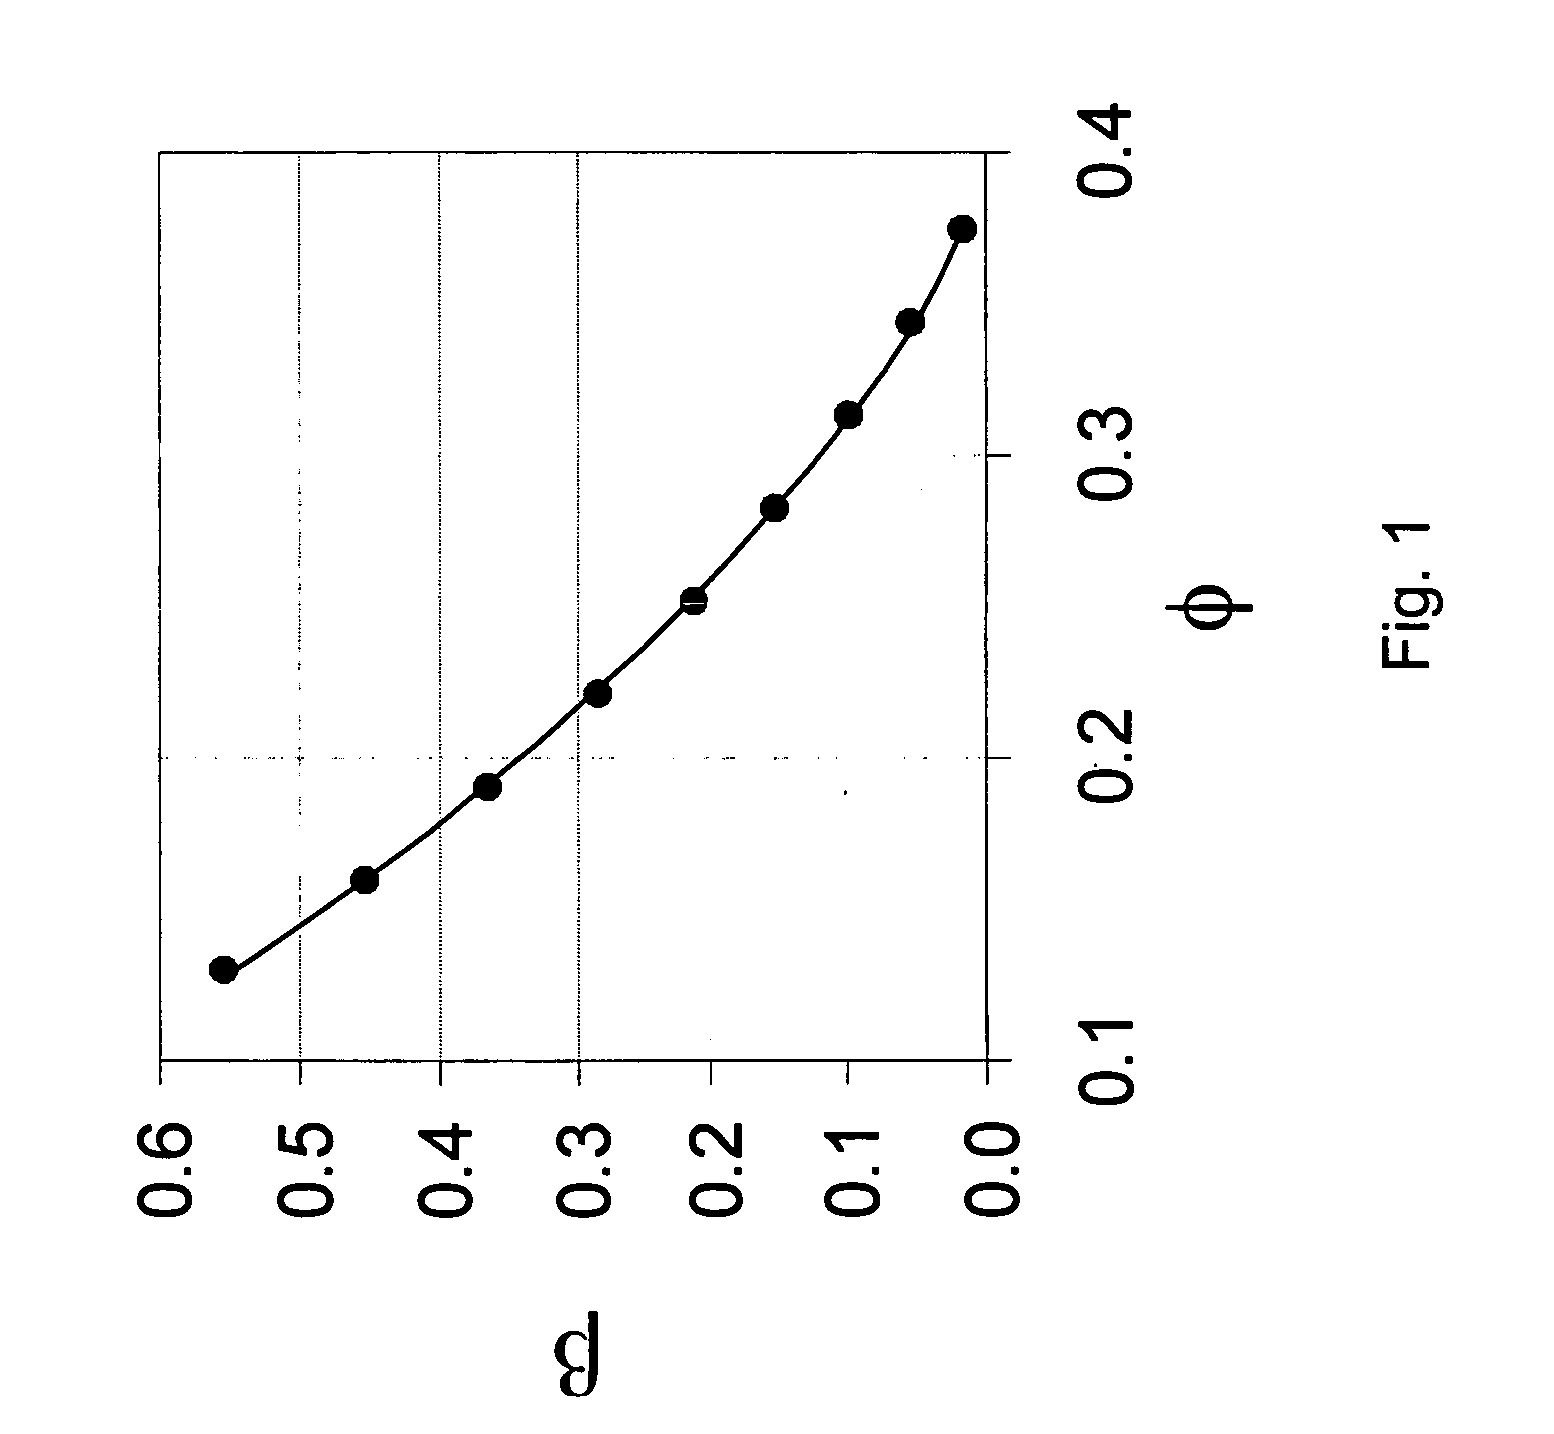 Method for improving prediction of the viability of potential petroleum reservoirs